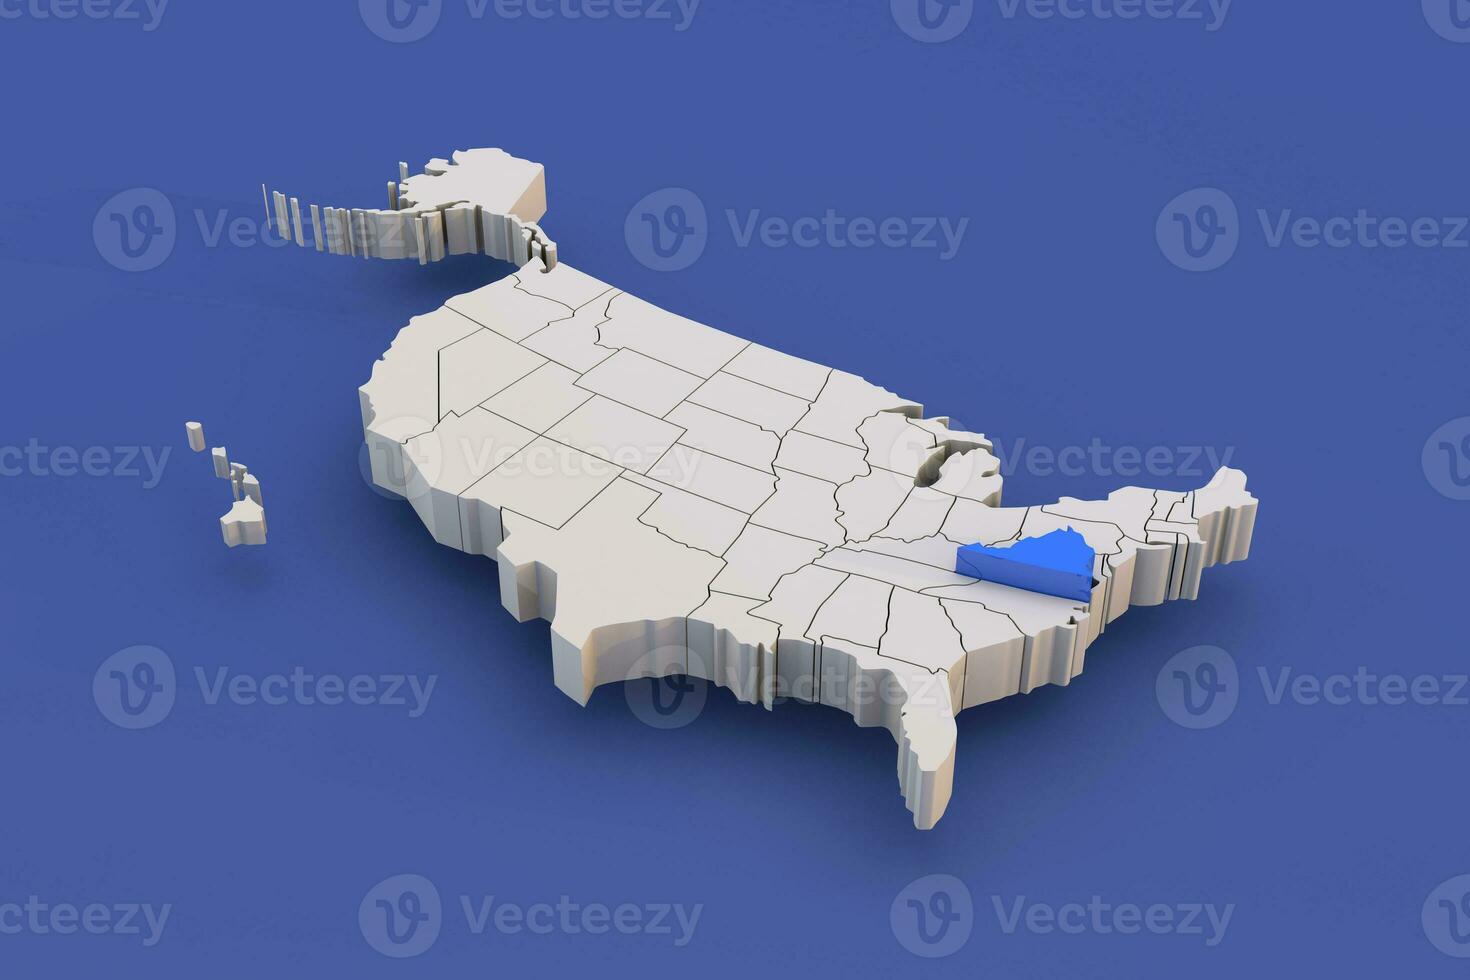 Virginia  state of USA map with white states a 3D united states of america map photo